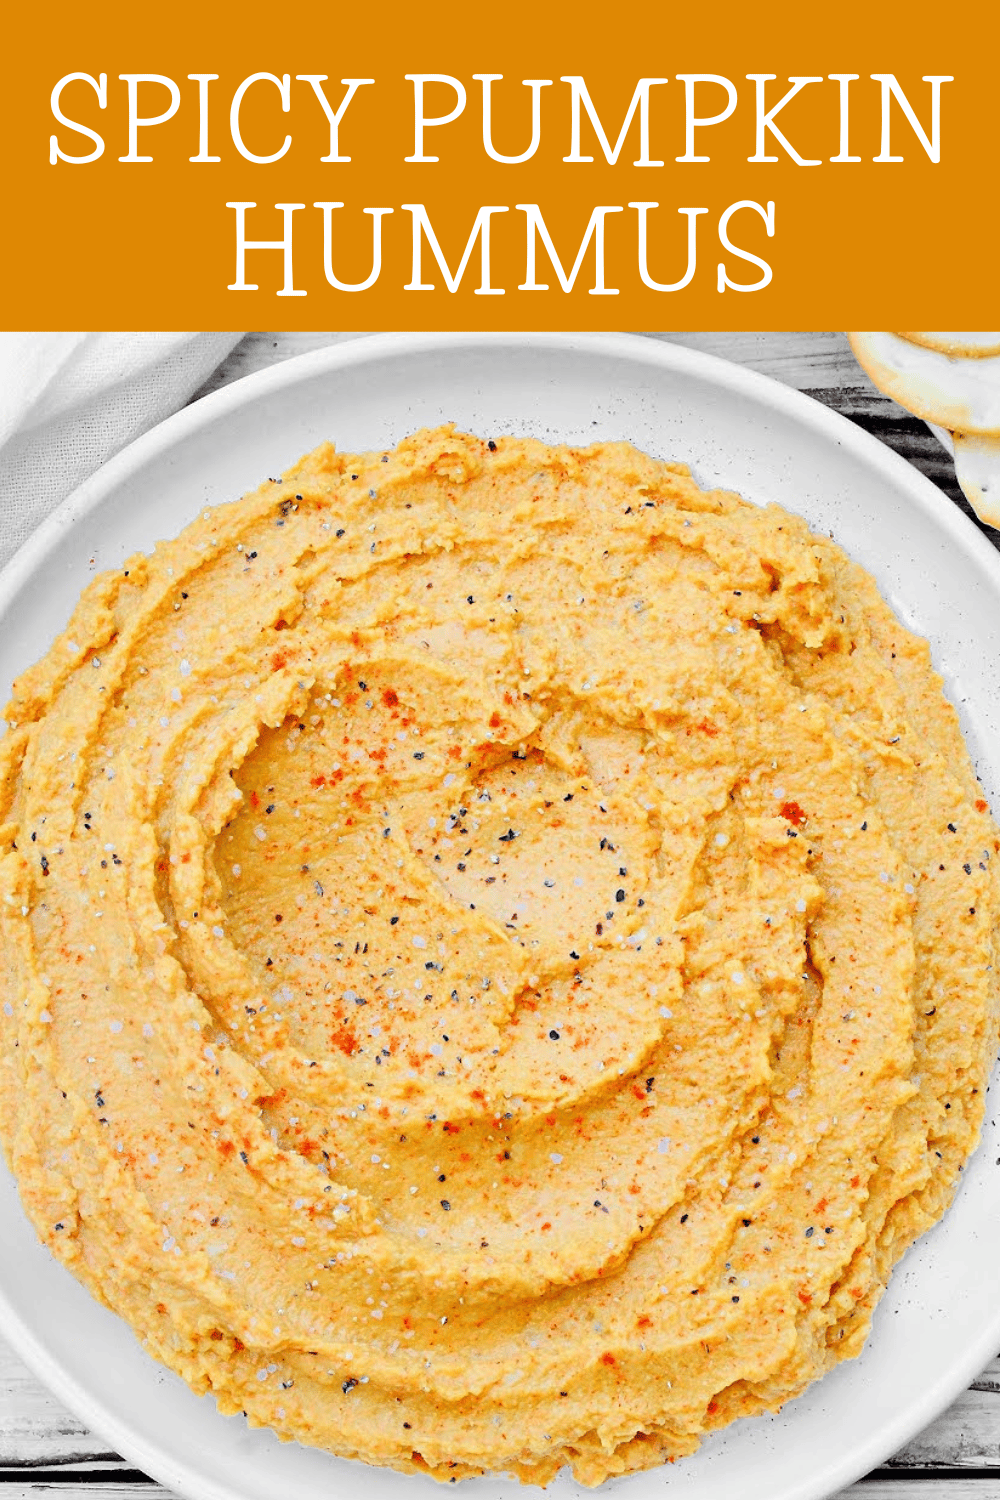 Pumpkin Hummus Recipe ~ Homemade pumpkin hummus is easy to make and loaded with smoky, savory autumn flavors with a spicy kick! via @thiswifecooks